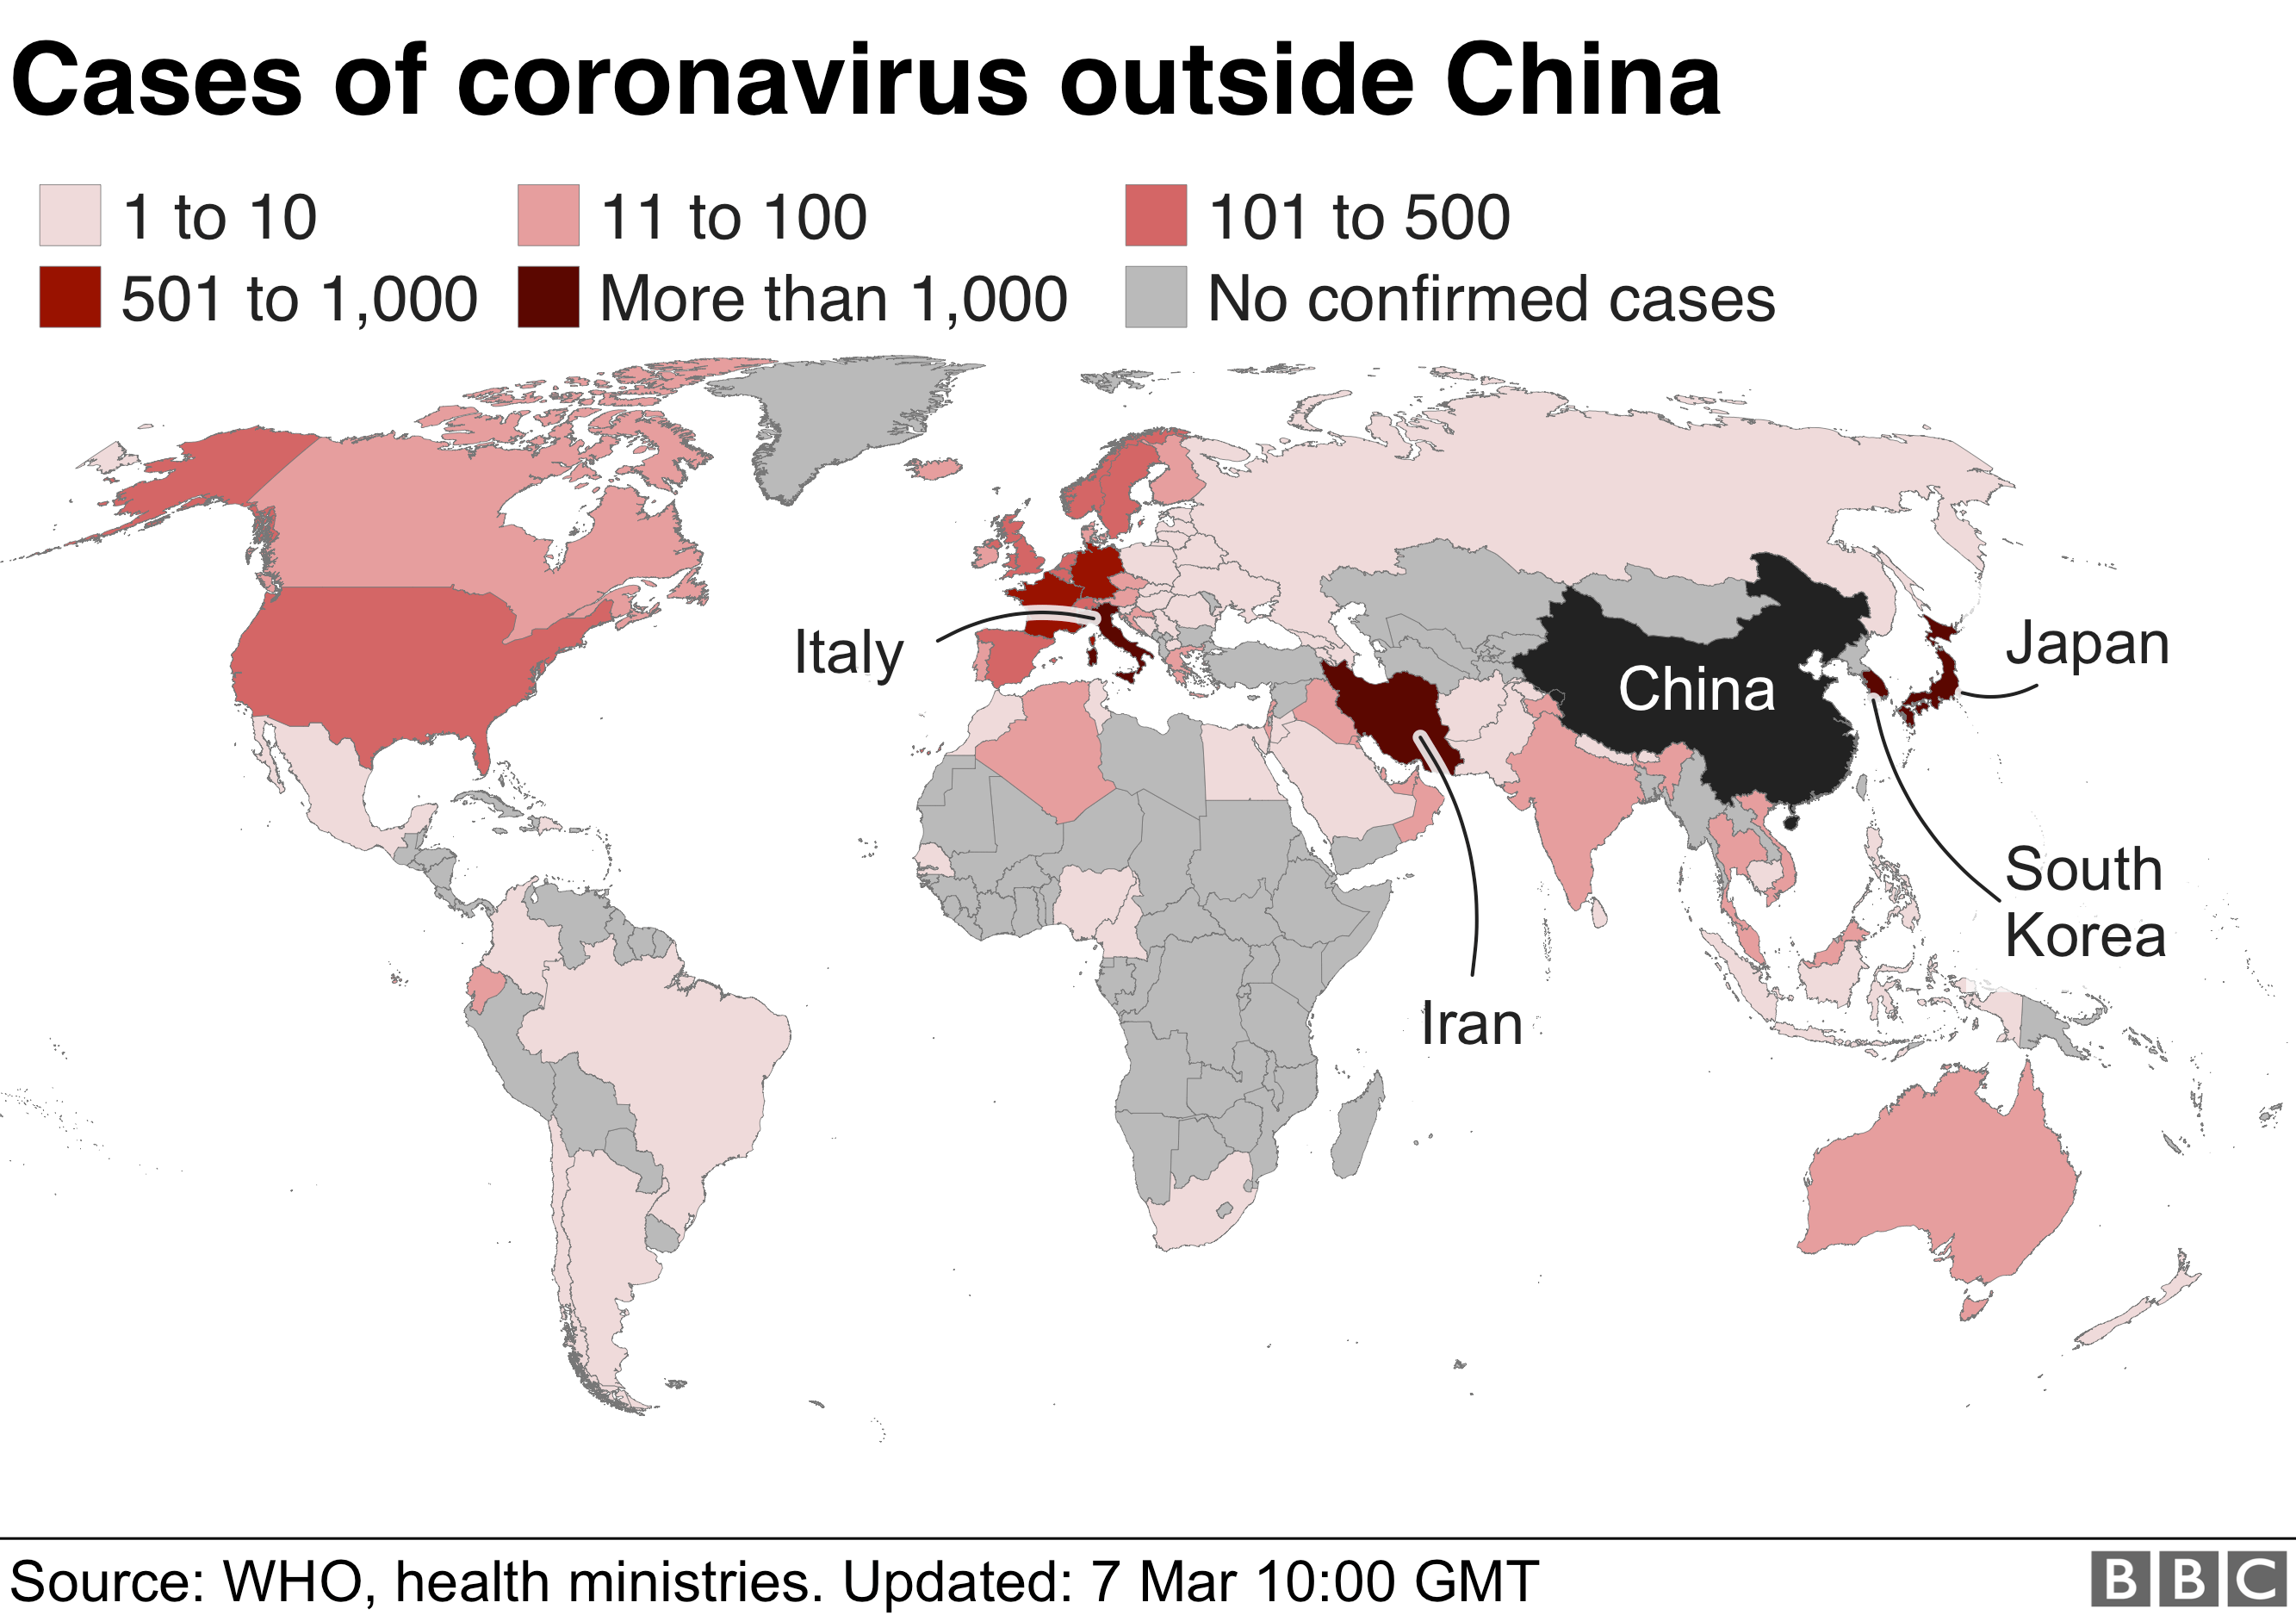 Cases of coronavirus reported outside China